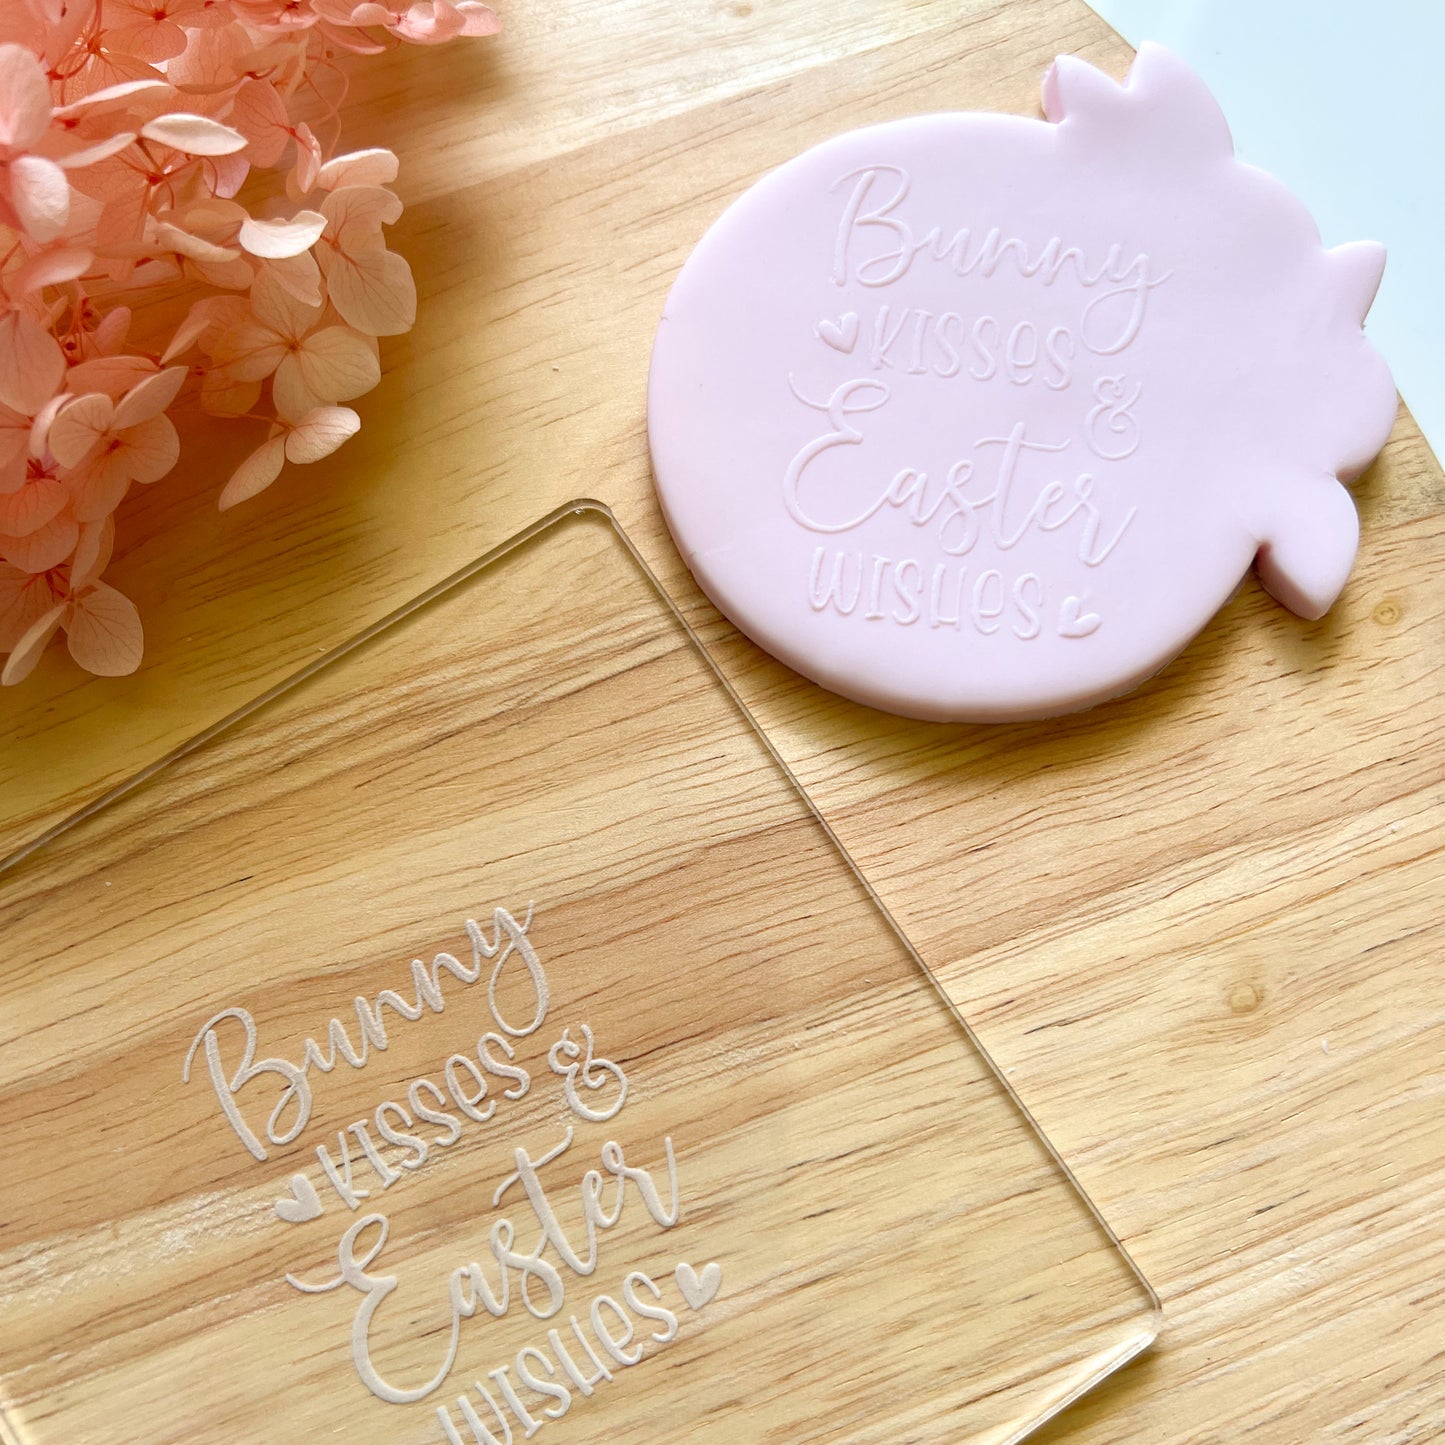 Bunny Kisses & Easter Wishes Stamp